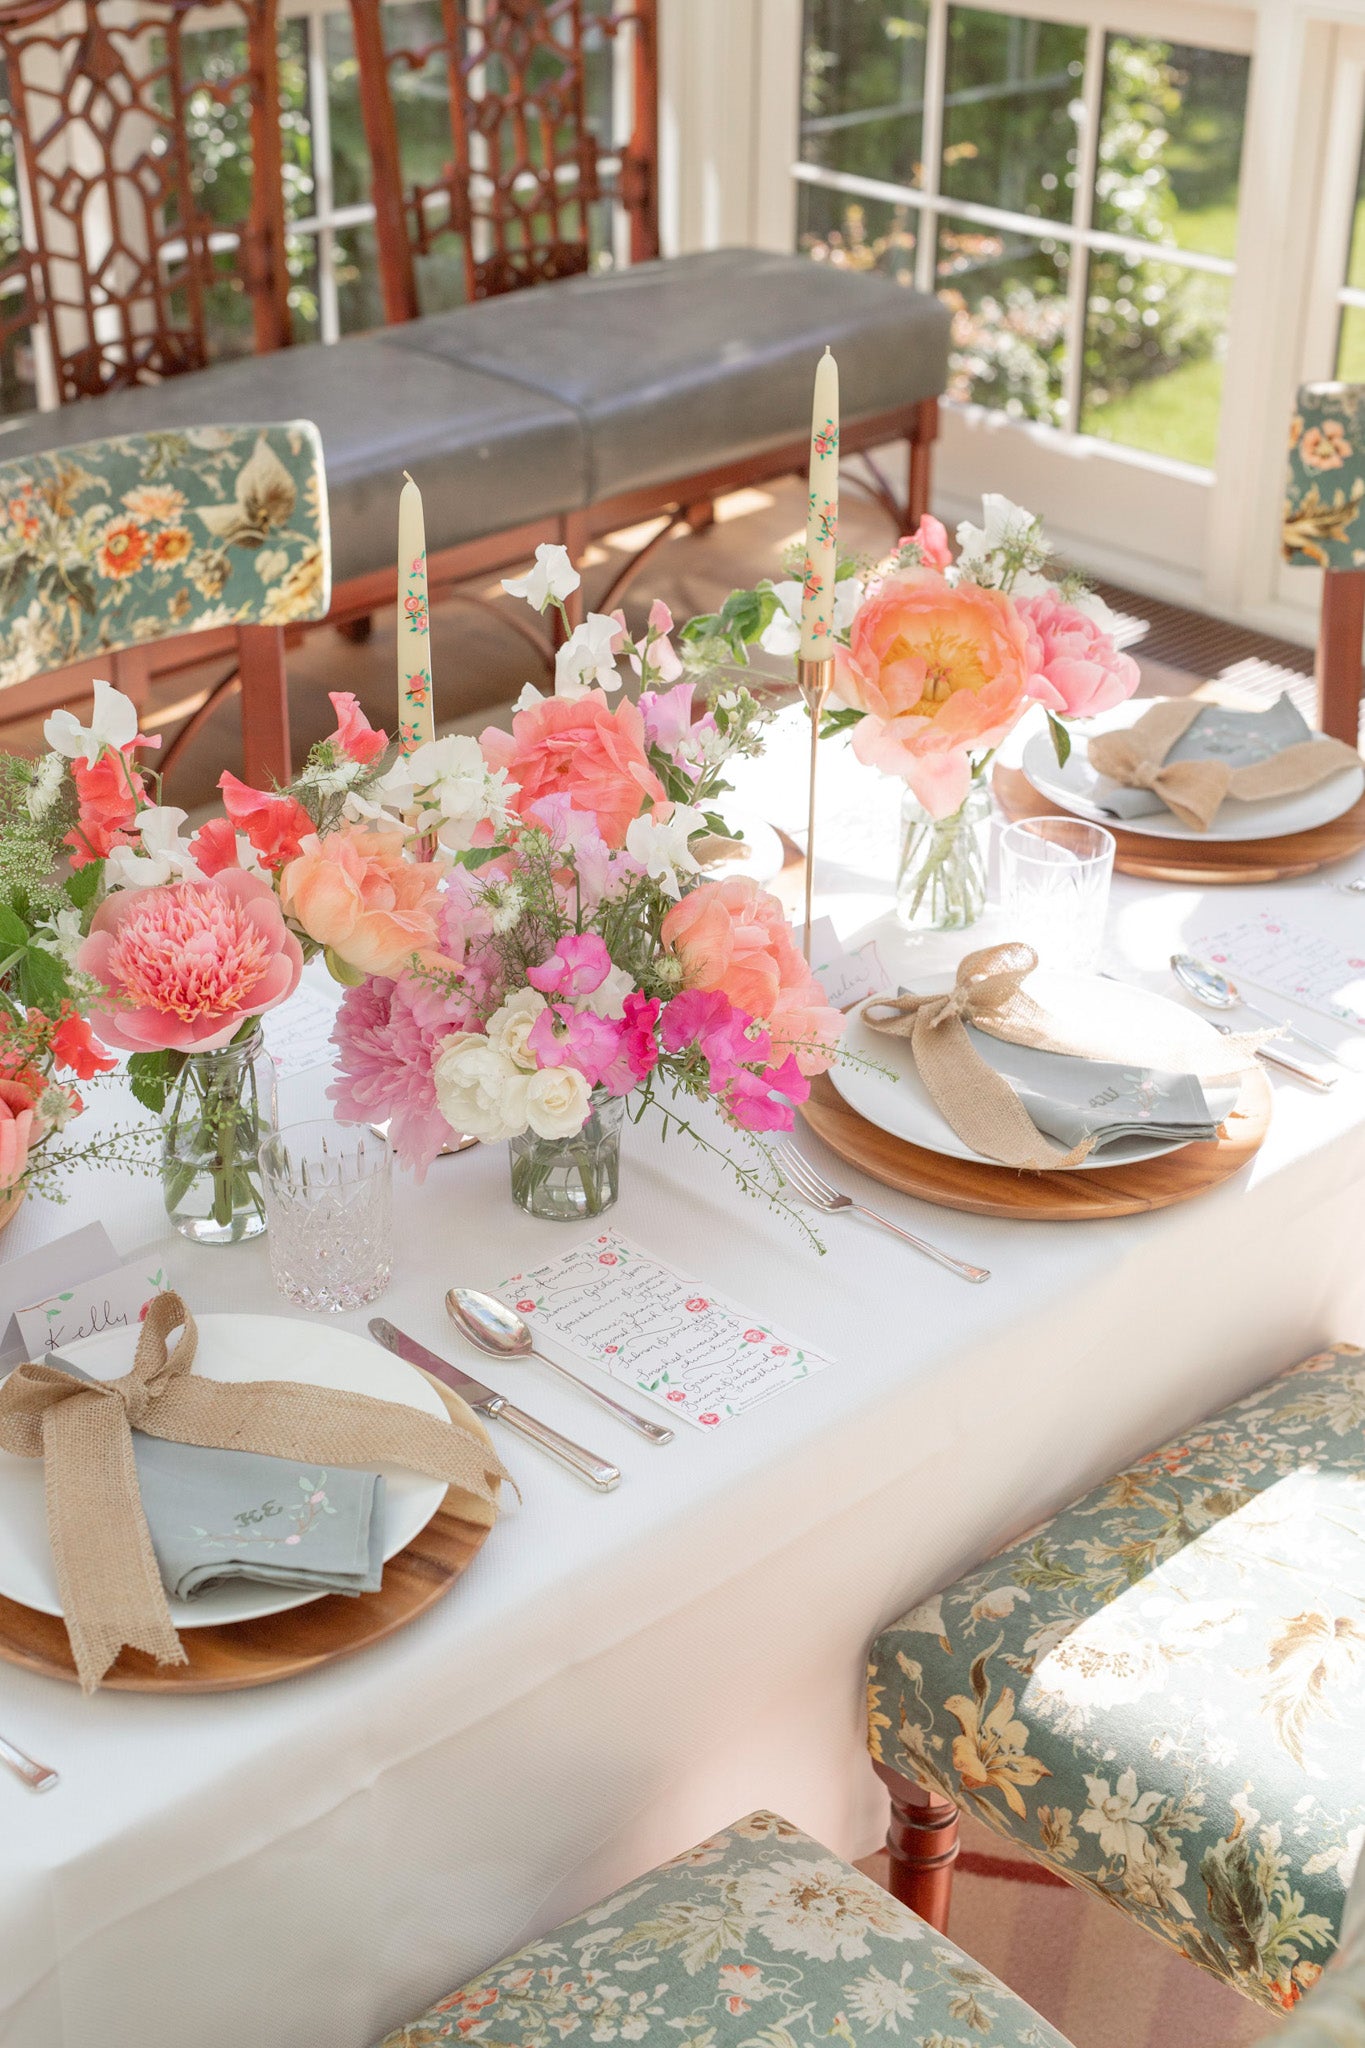 Details of a spring tablescape with peonies and hessian bows by Rosanna Falconer